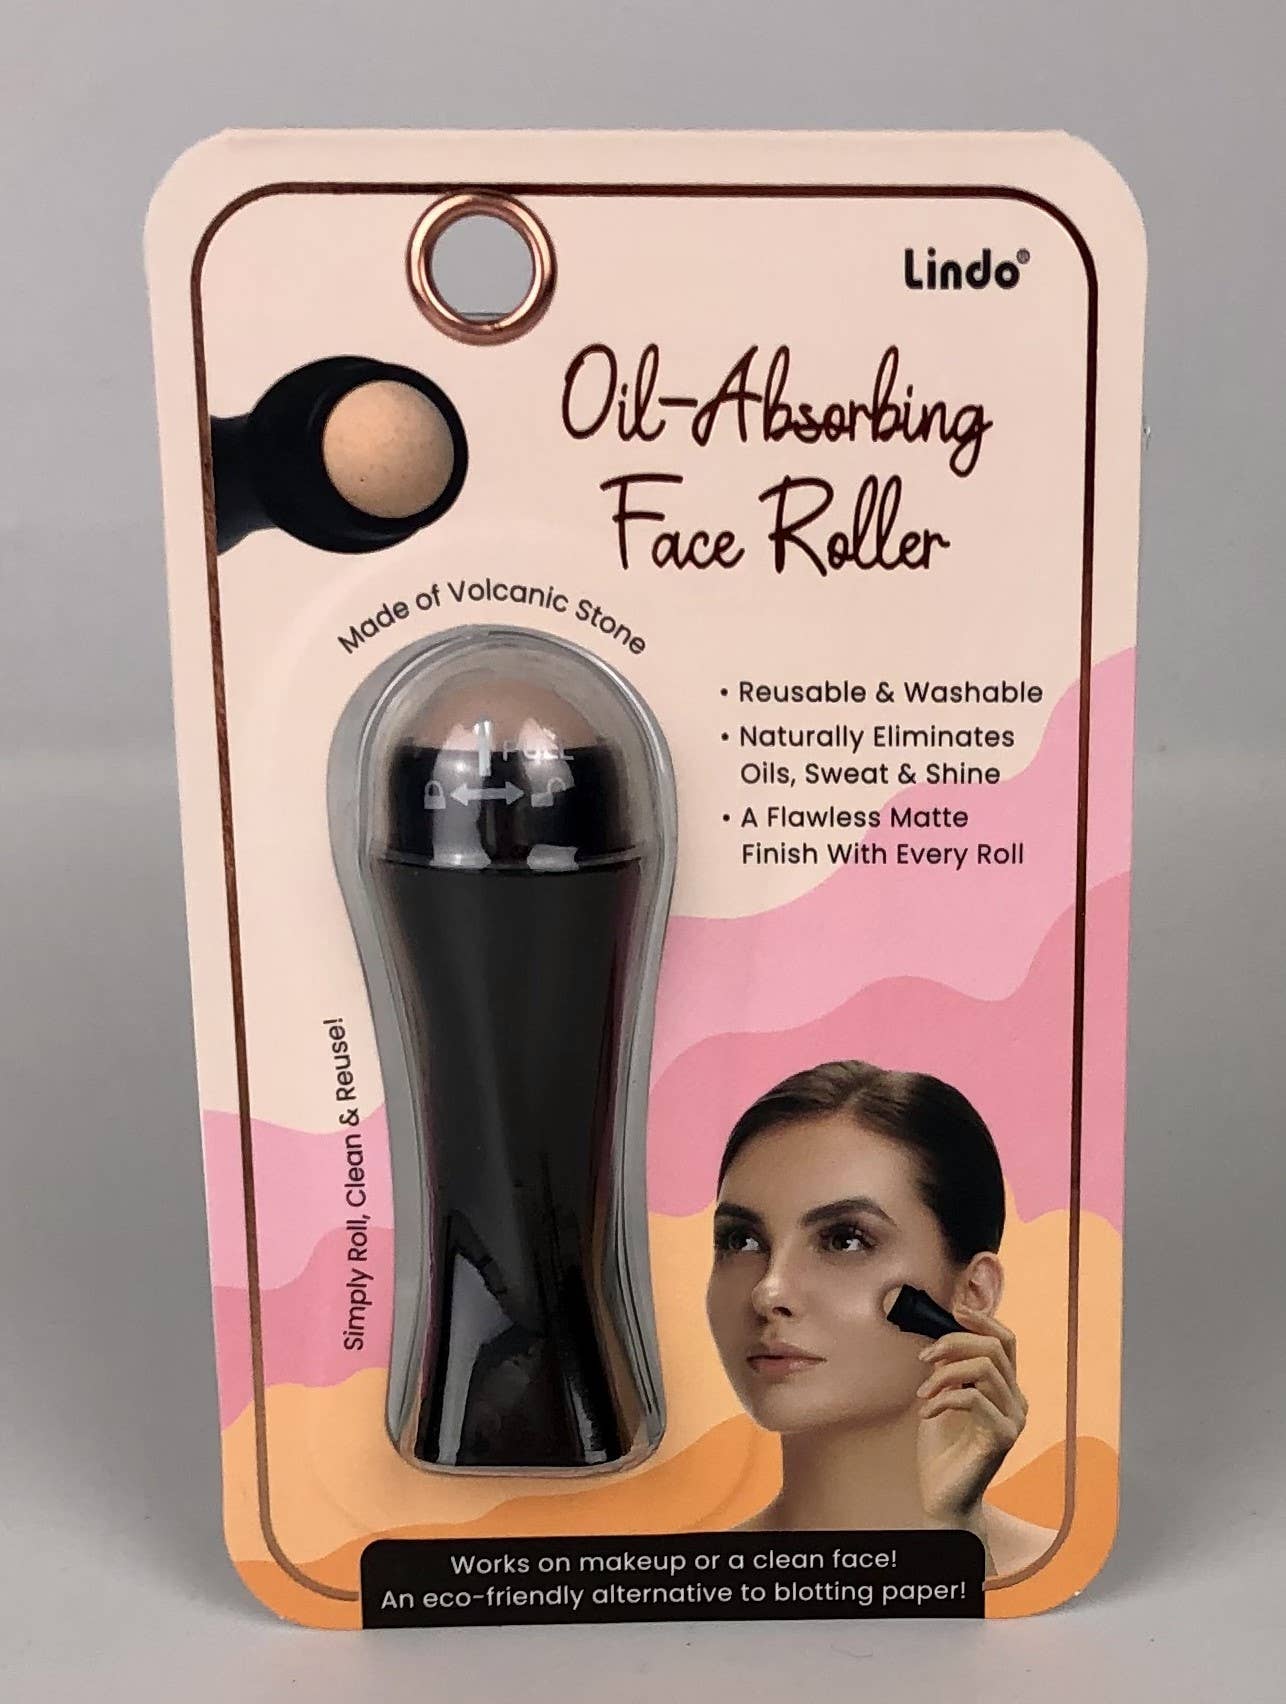 Lindo Oil-Absorbing Volcanic Stone Face Roller